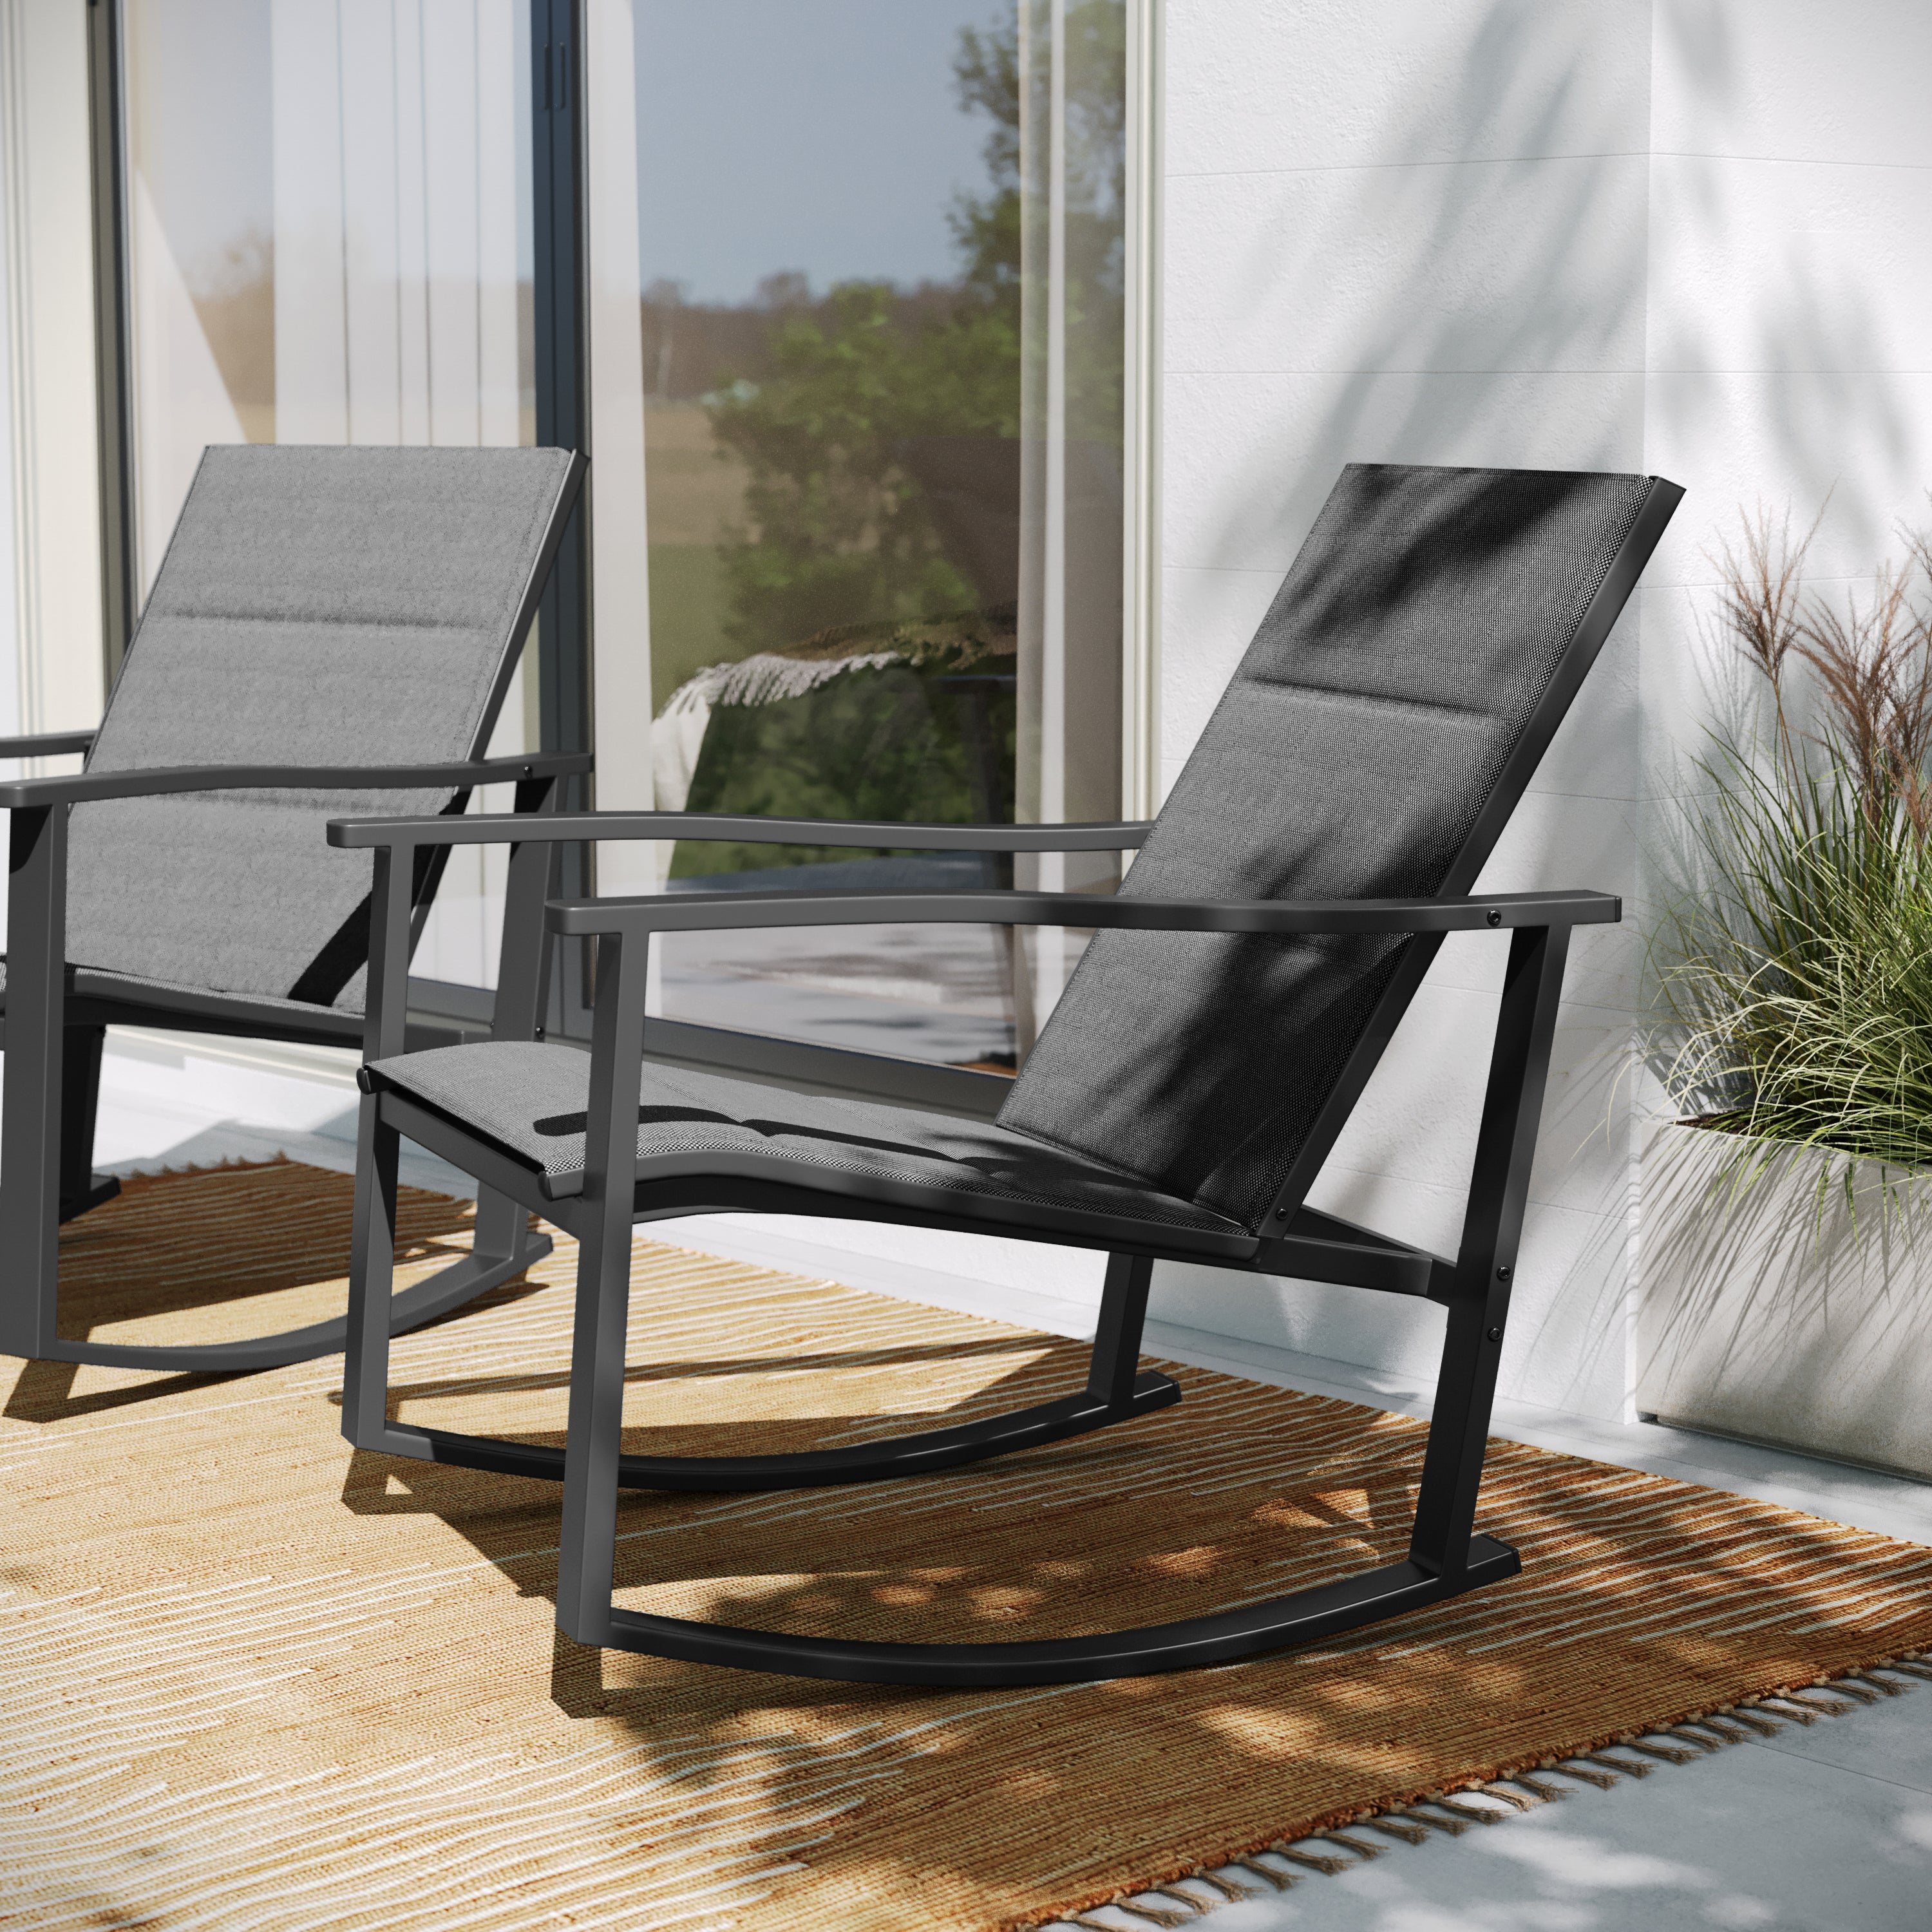 Brazos Set of 2 Outdoor Rocking Chairs with Flex Comfort Material and Metal Frame-Metal Patio Rocking Chair-Flash Furniture-Wall2Wall Furnishings